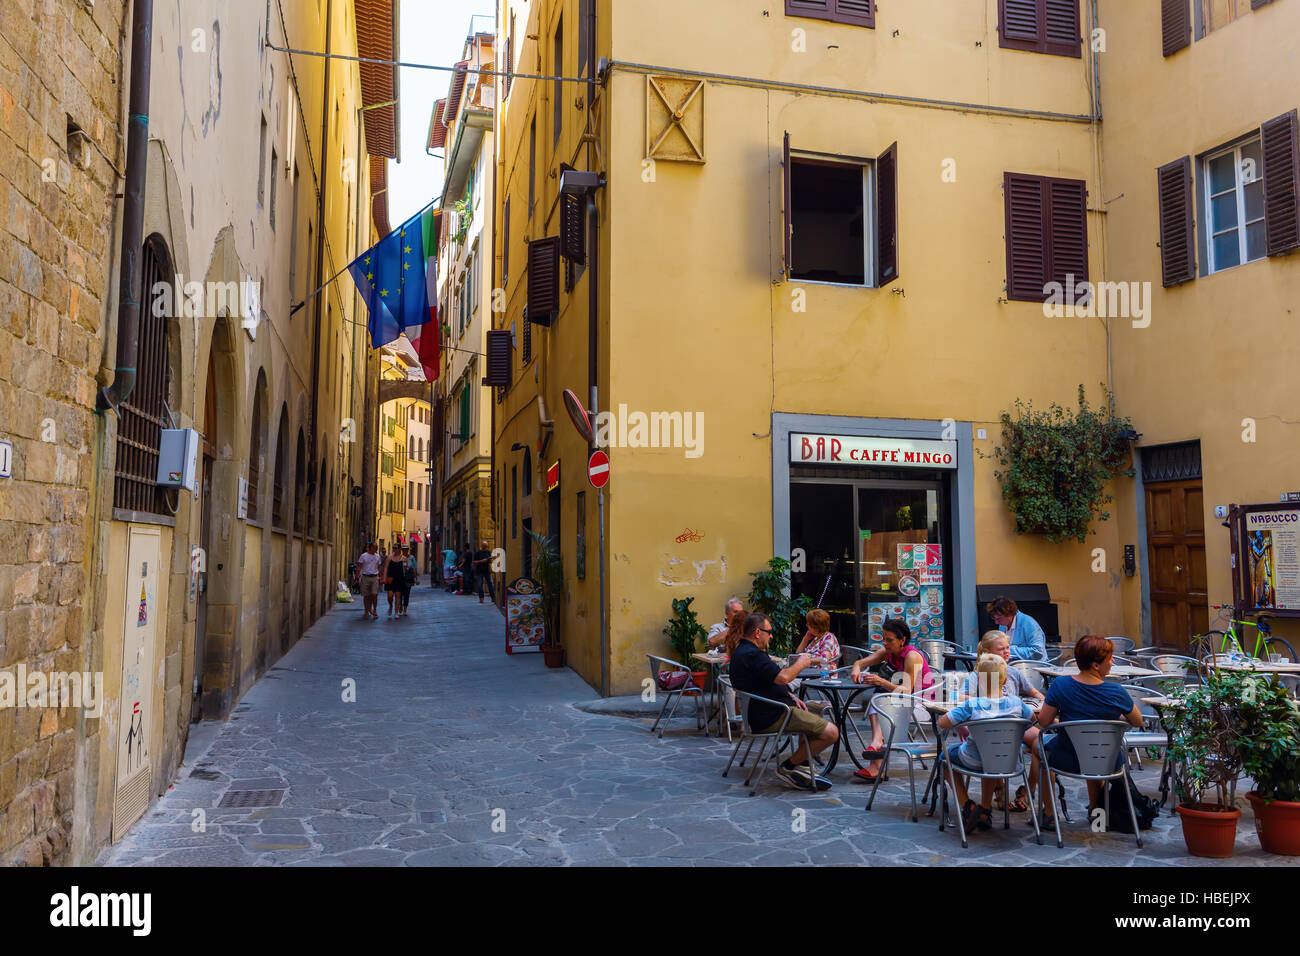 street scene in the medieval old town of Florence, Italy Stock Photo